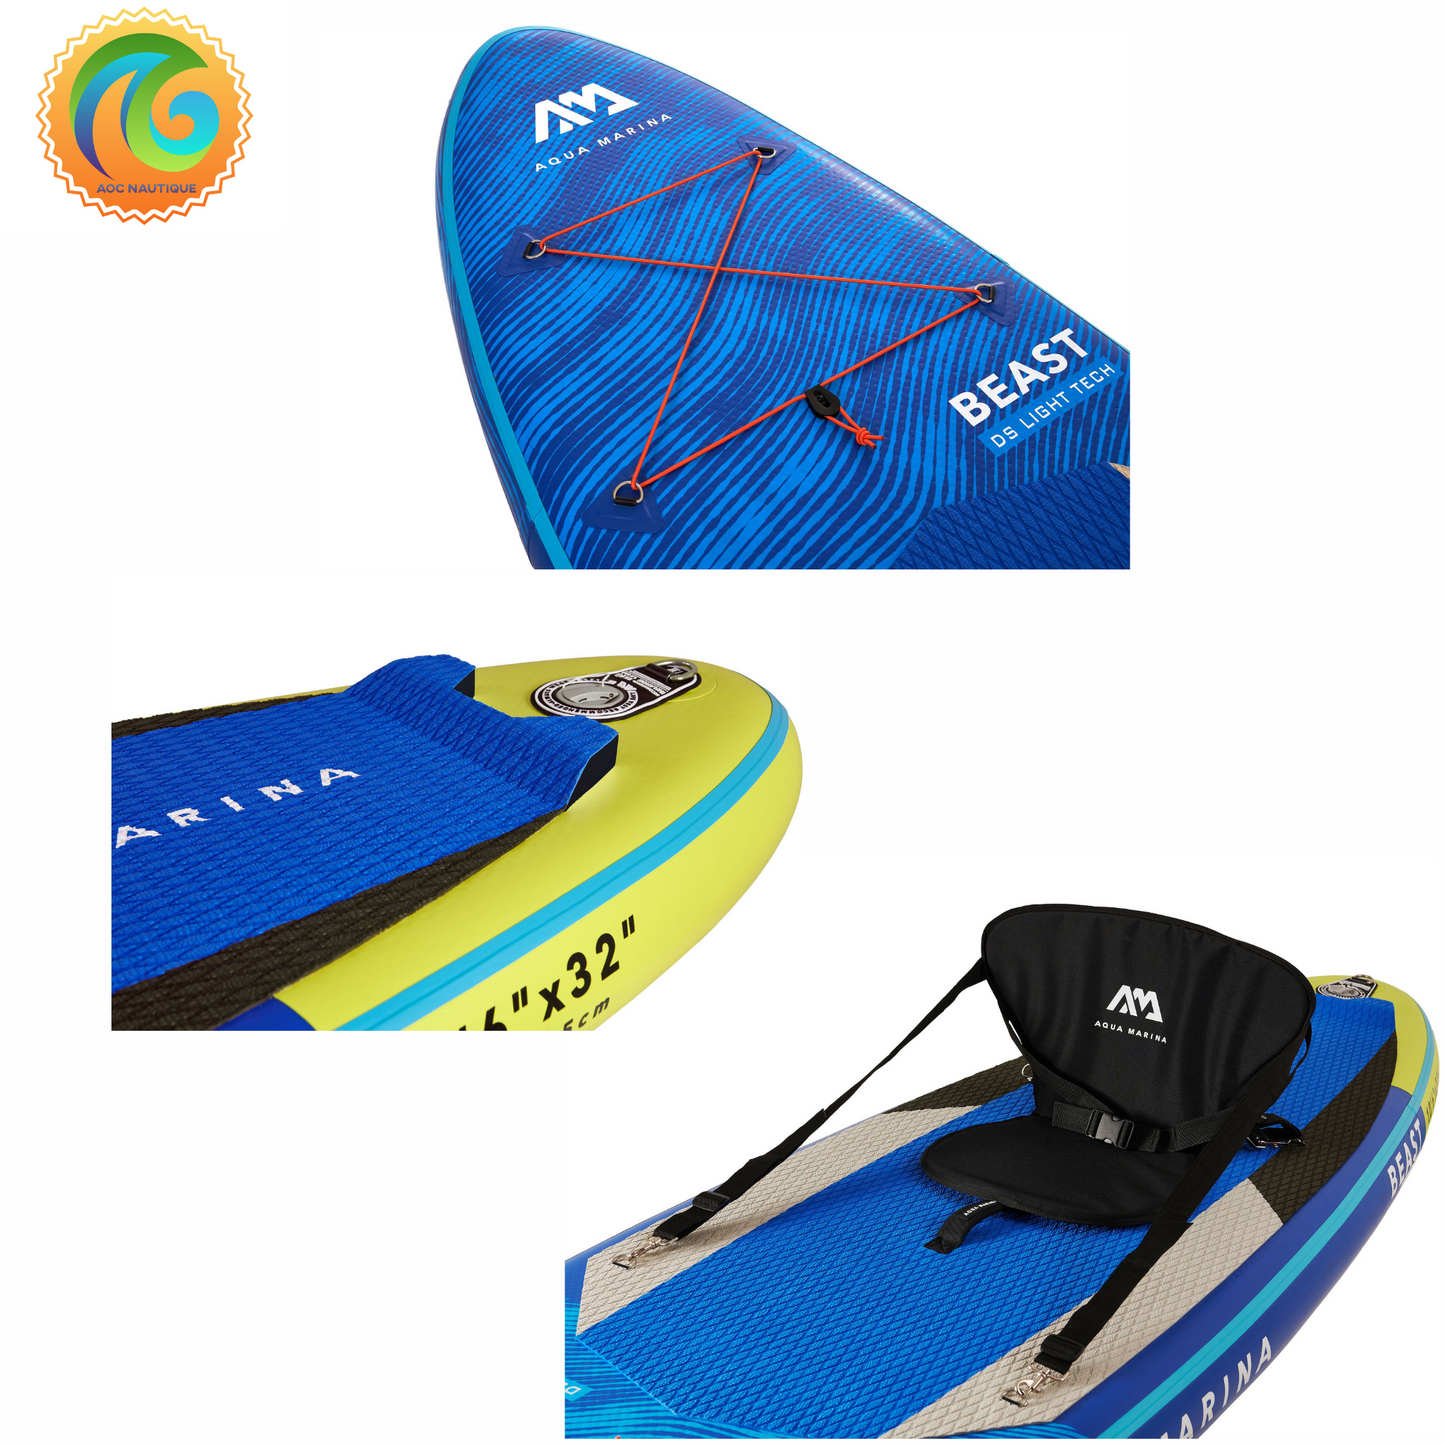 Purchase and sale of Paddle board Aquamarina Beast # BT-21BEP including accessories. Photo of the Kayak seat and accessories designed for this paddle board